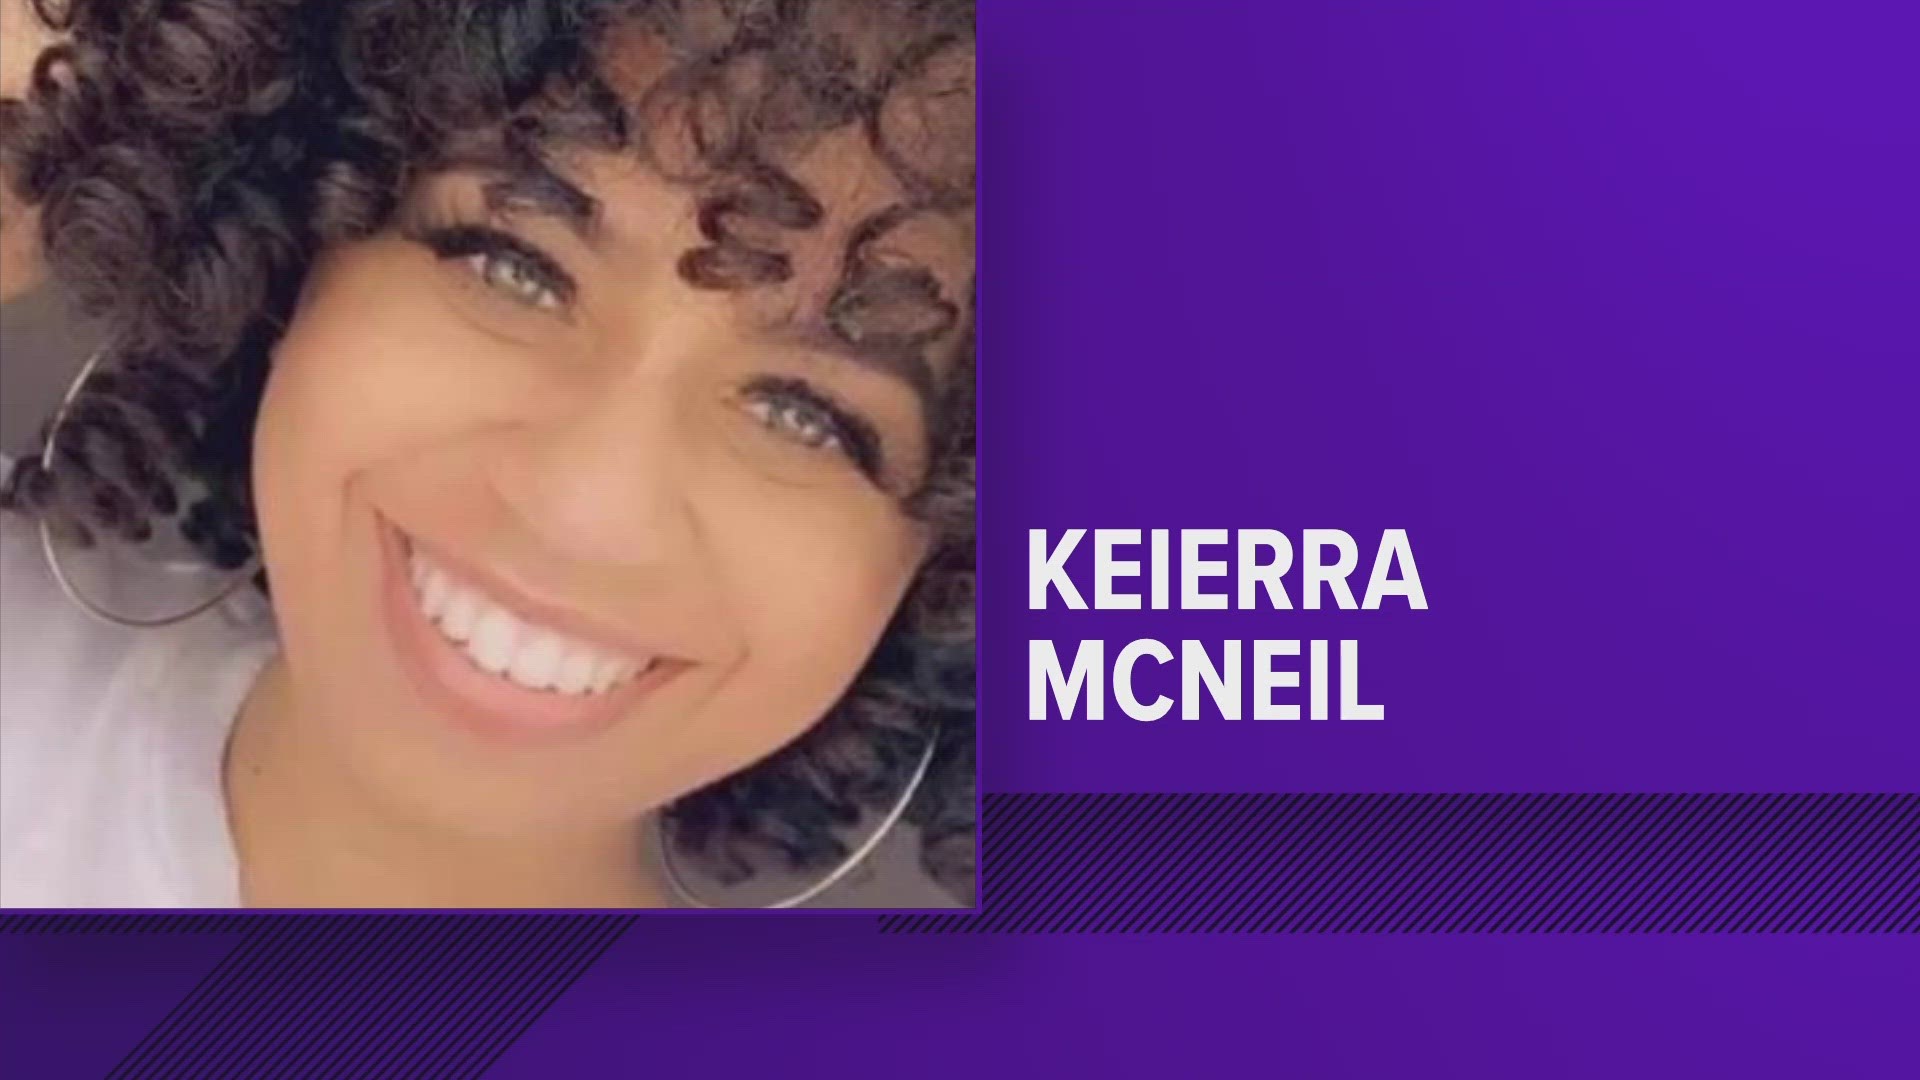 Keierra McNeil was shot and killed just before 8 p.m. Aug. 20, 2020, outside the Walgreens in the 9000 block of Walnut Grove.